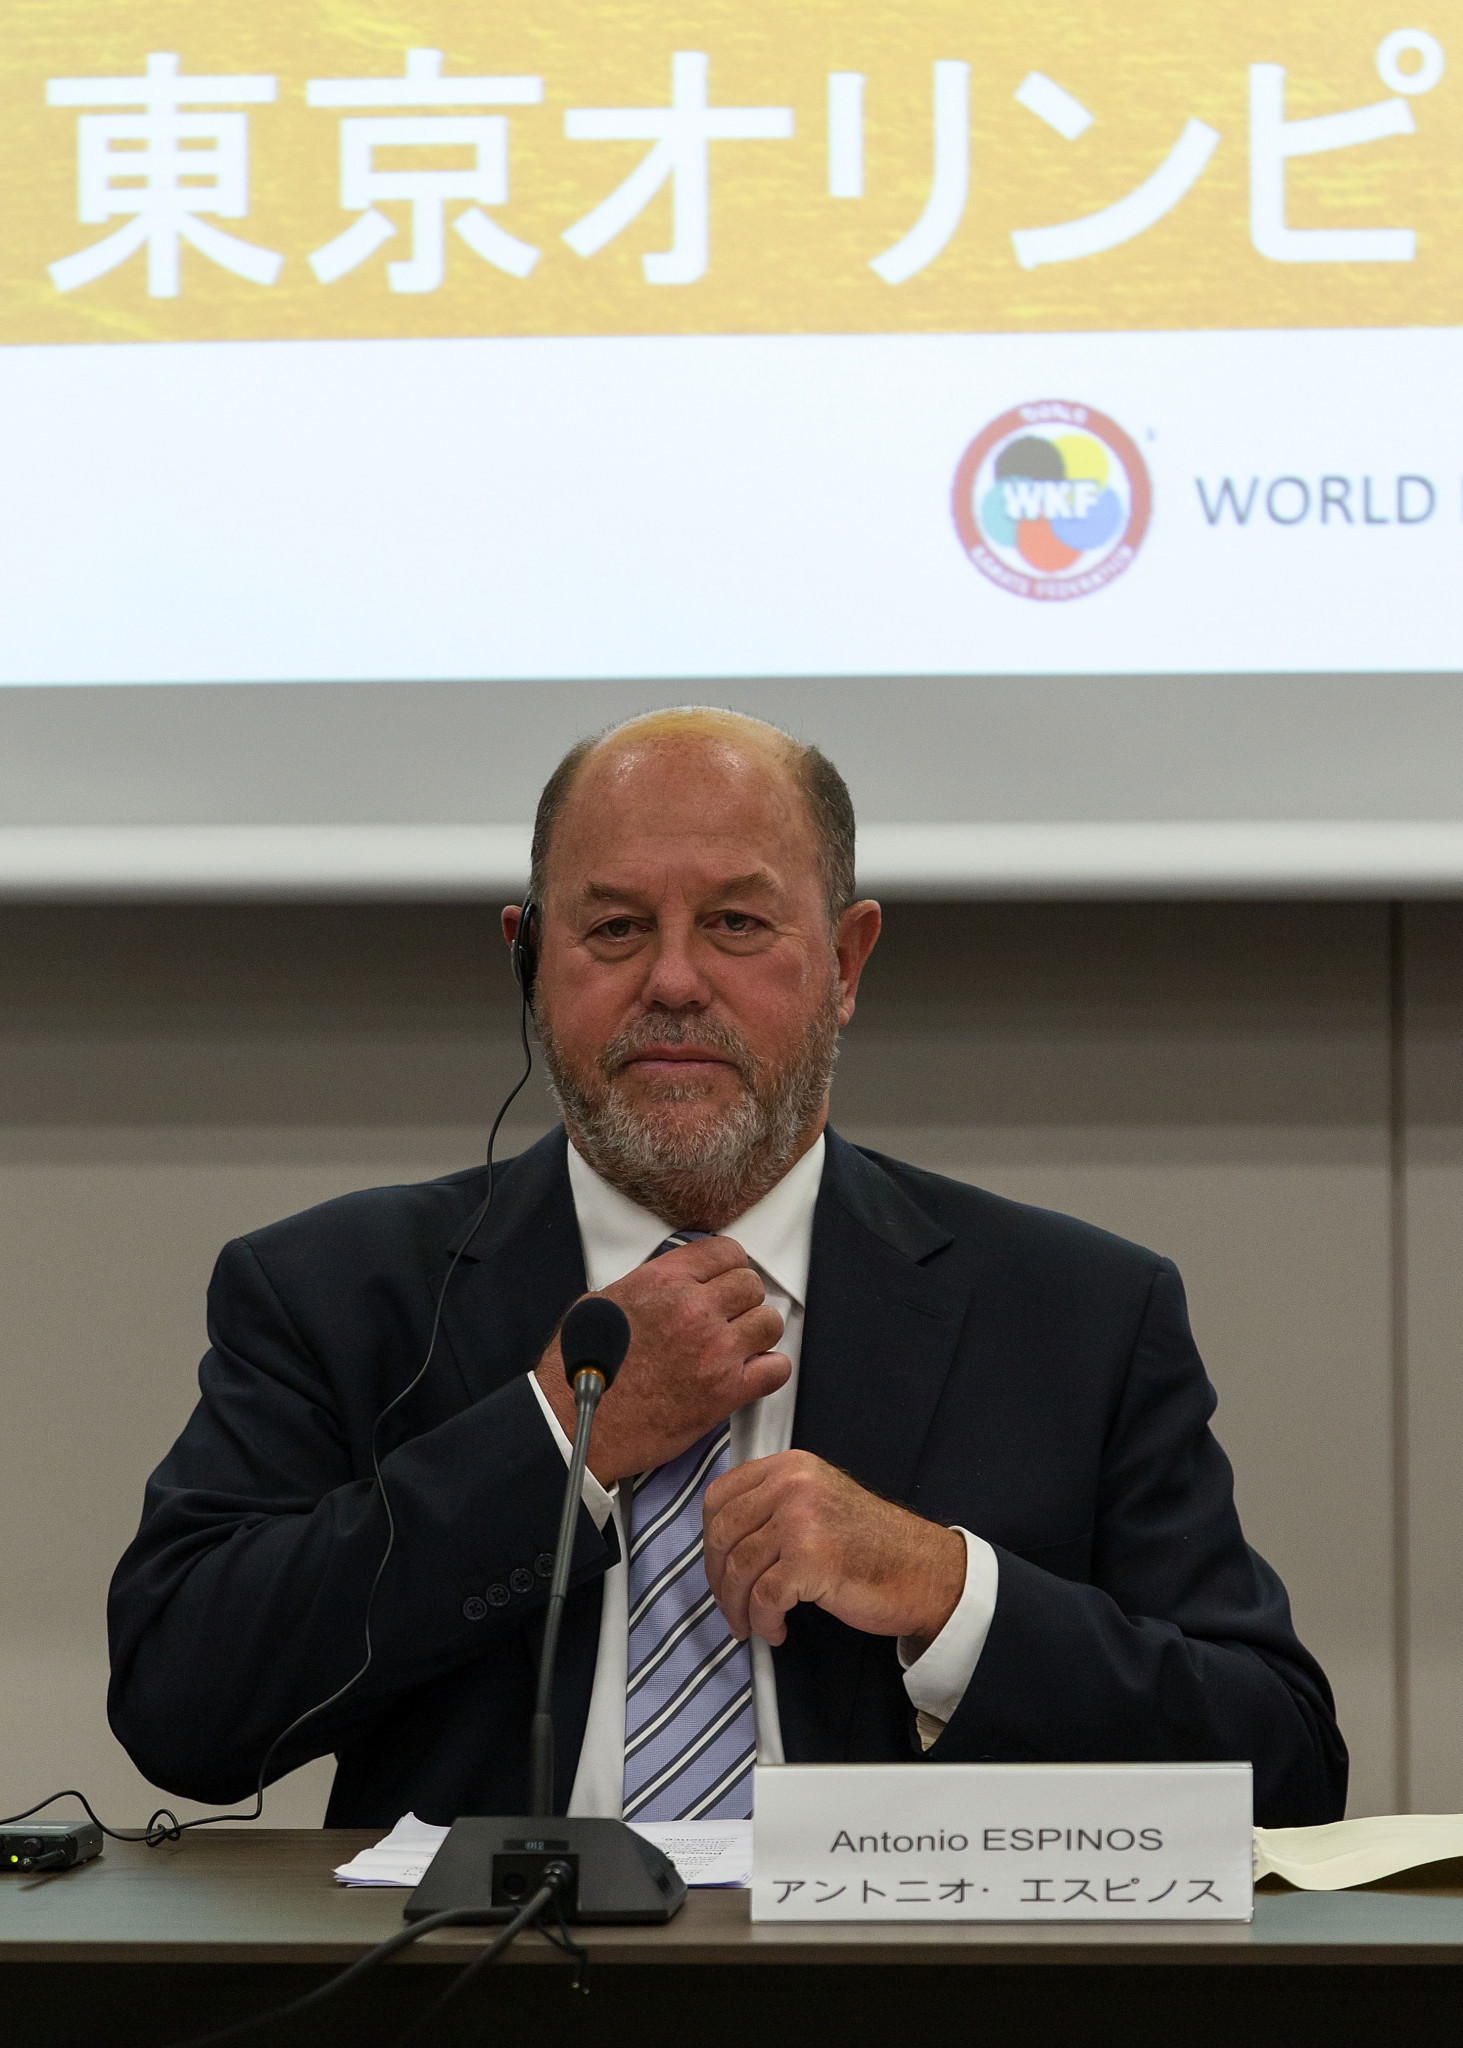 Antonio Espinós is claiming that the WKF Strategic Plan will help the World Championships grow "in terms of competitive edge and spectacularity" ©Getty Images